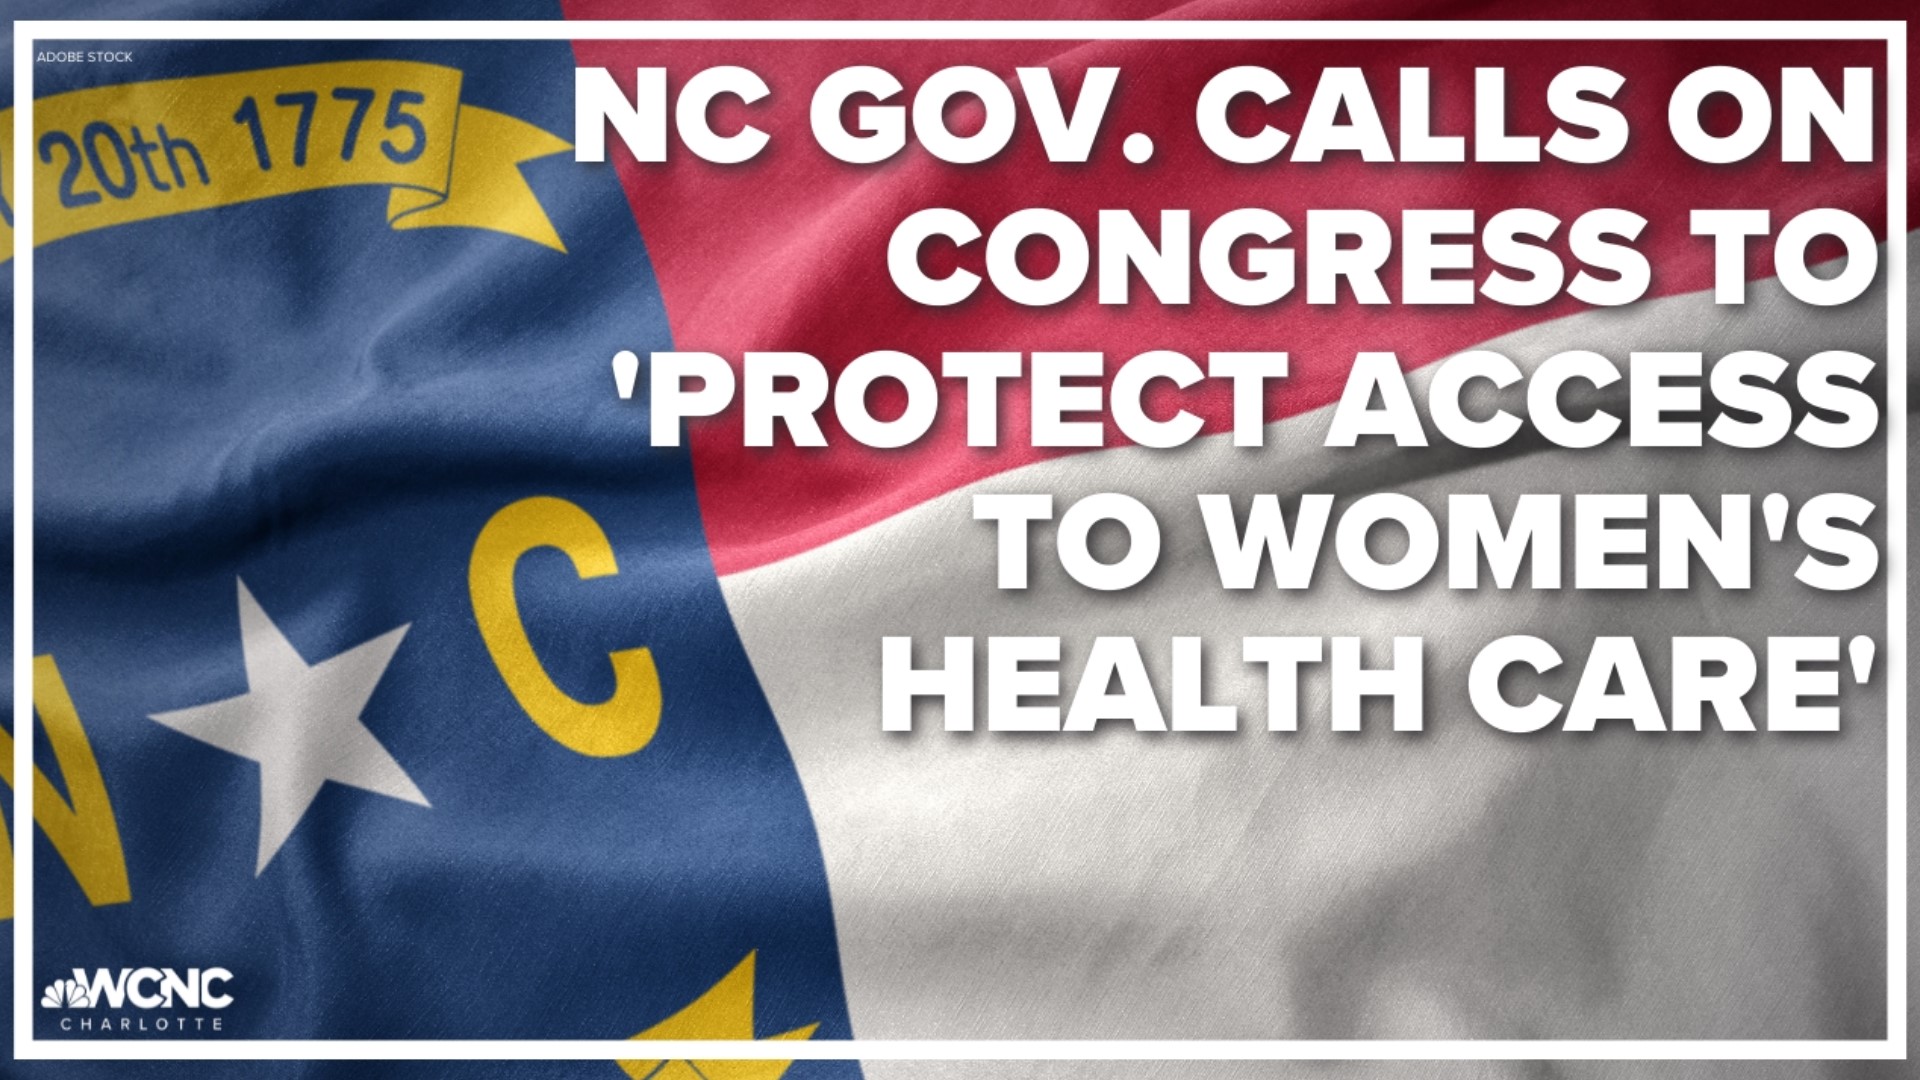 North Carolina Gov. Cooper is among 17 governors calling on Congress to "immediately protect access to women's health care," according to the governor's office.